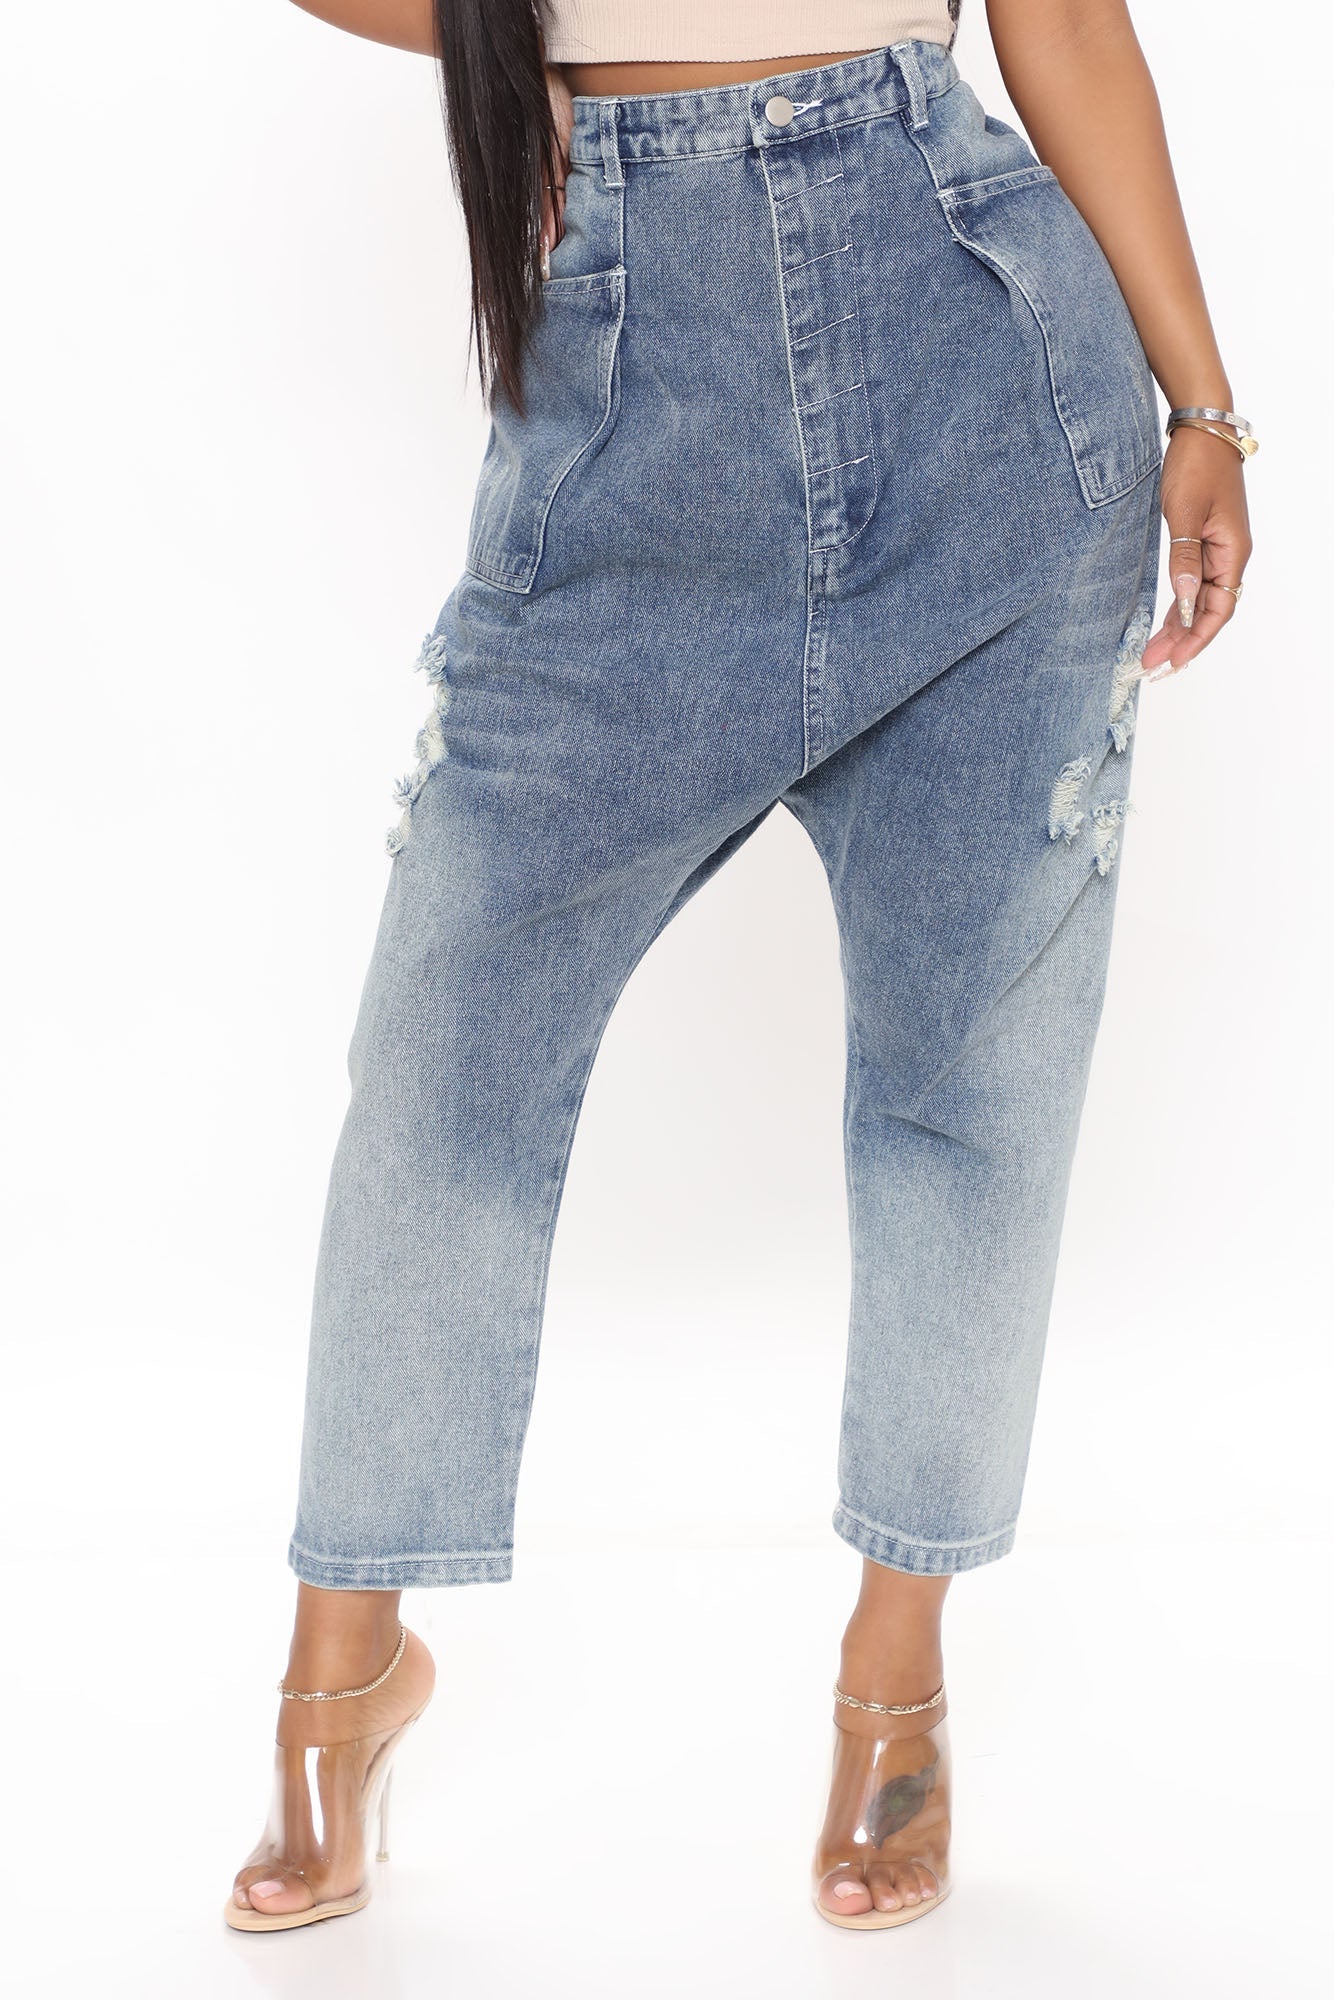 All Distressed About It Super Slouchy Jeans - Medium Blue Wash